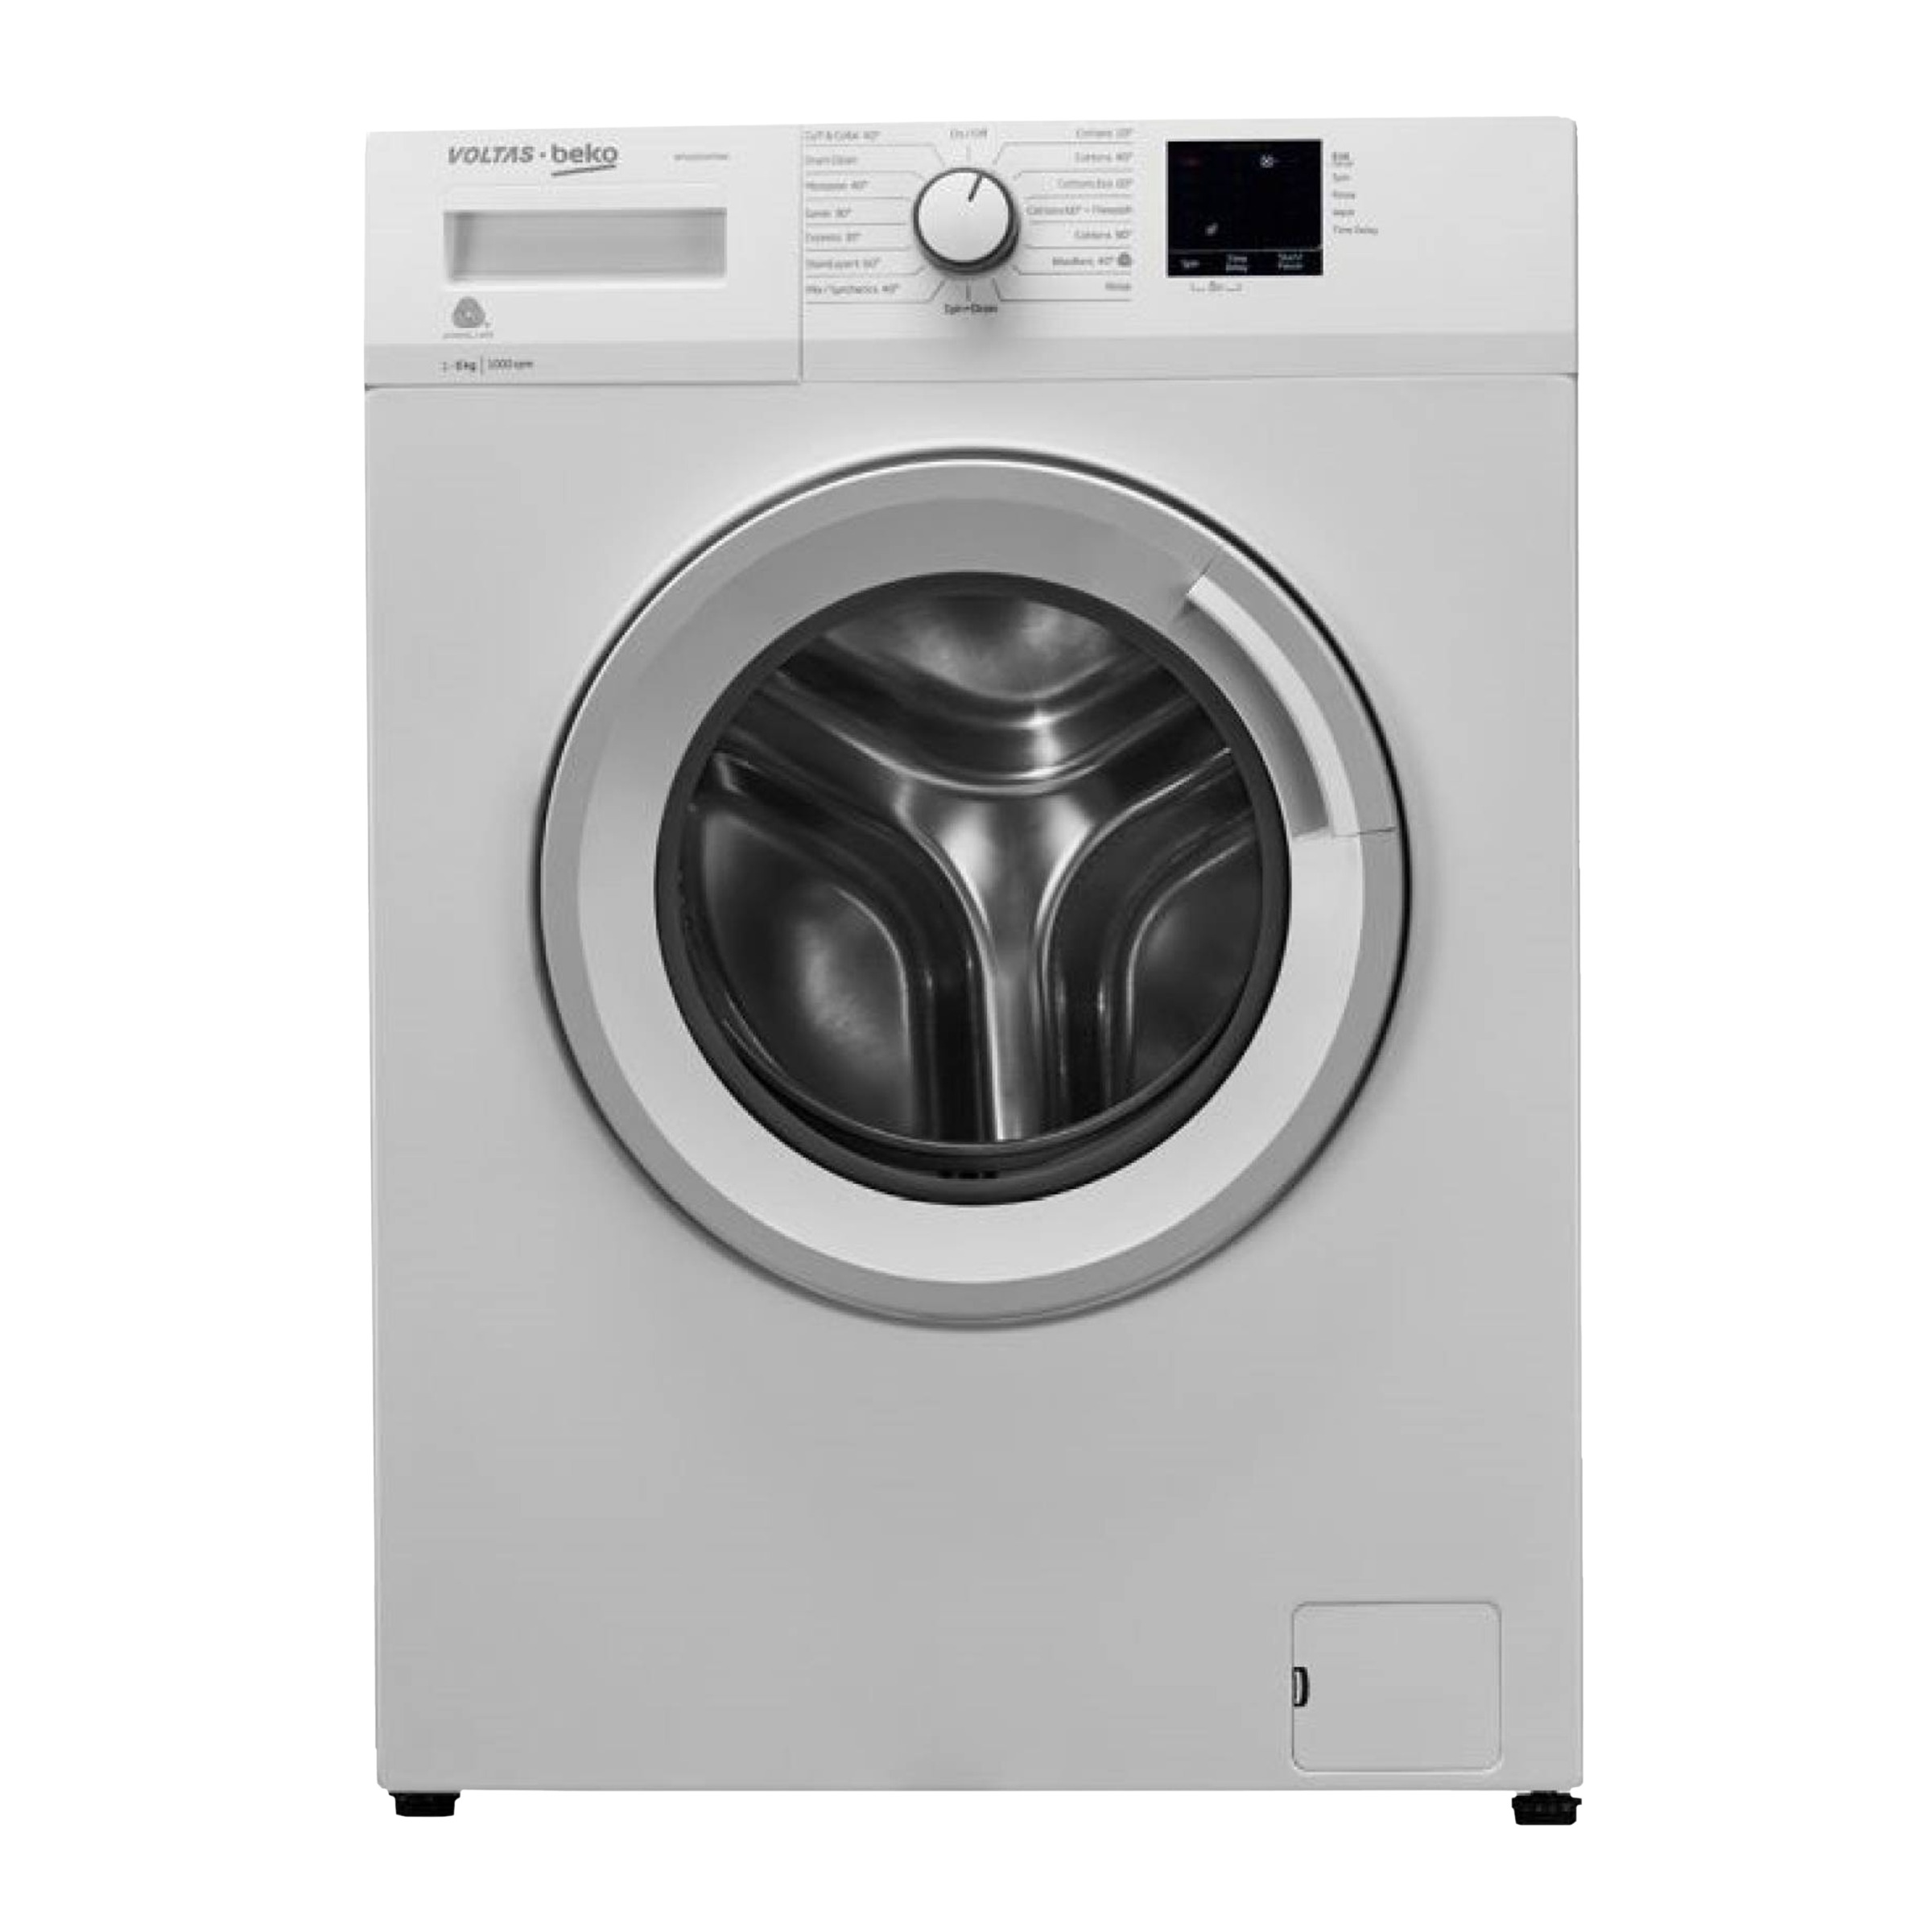 Voltas Beko 6 kg 5 Star Fully Automatic Front Load Washing Machine (WFL6010VPWW, In-built Heater, White)